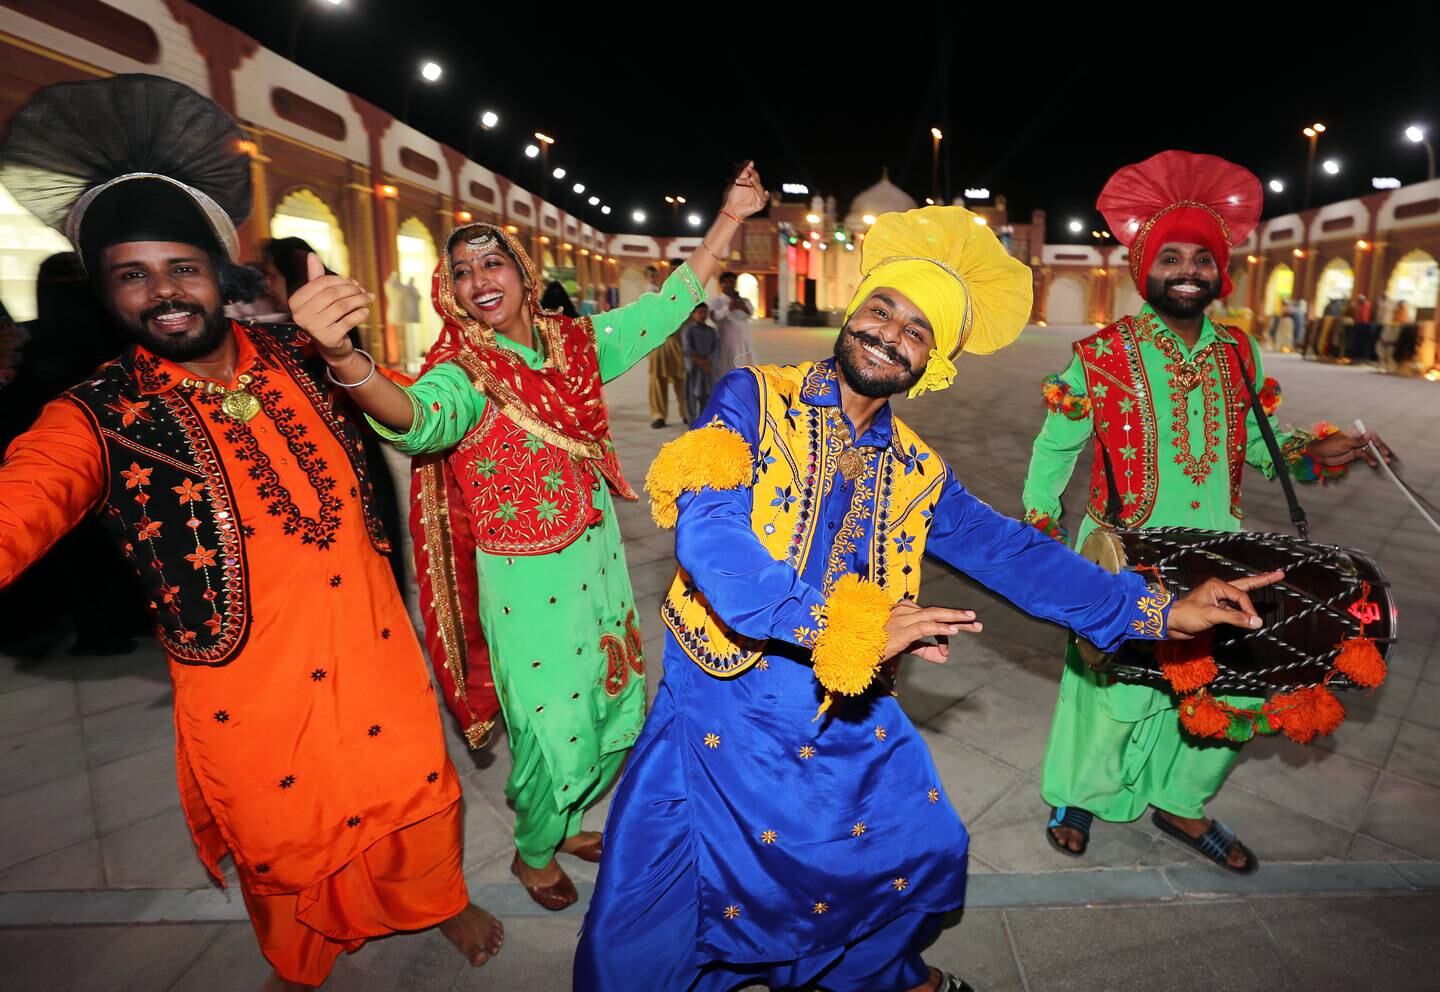 Indian dancers on the opening day of the Sheikh Zayed Festival in Al Wathba, Abu Dhabi. Chris Whiteoak / The National